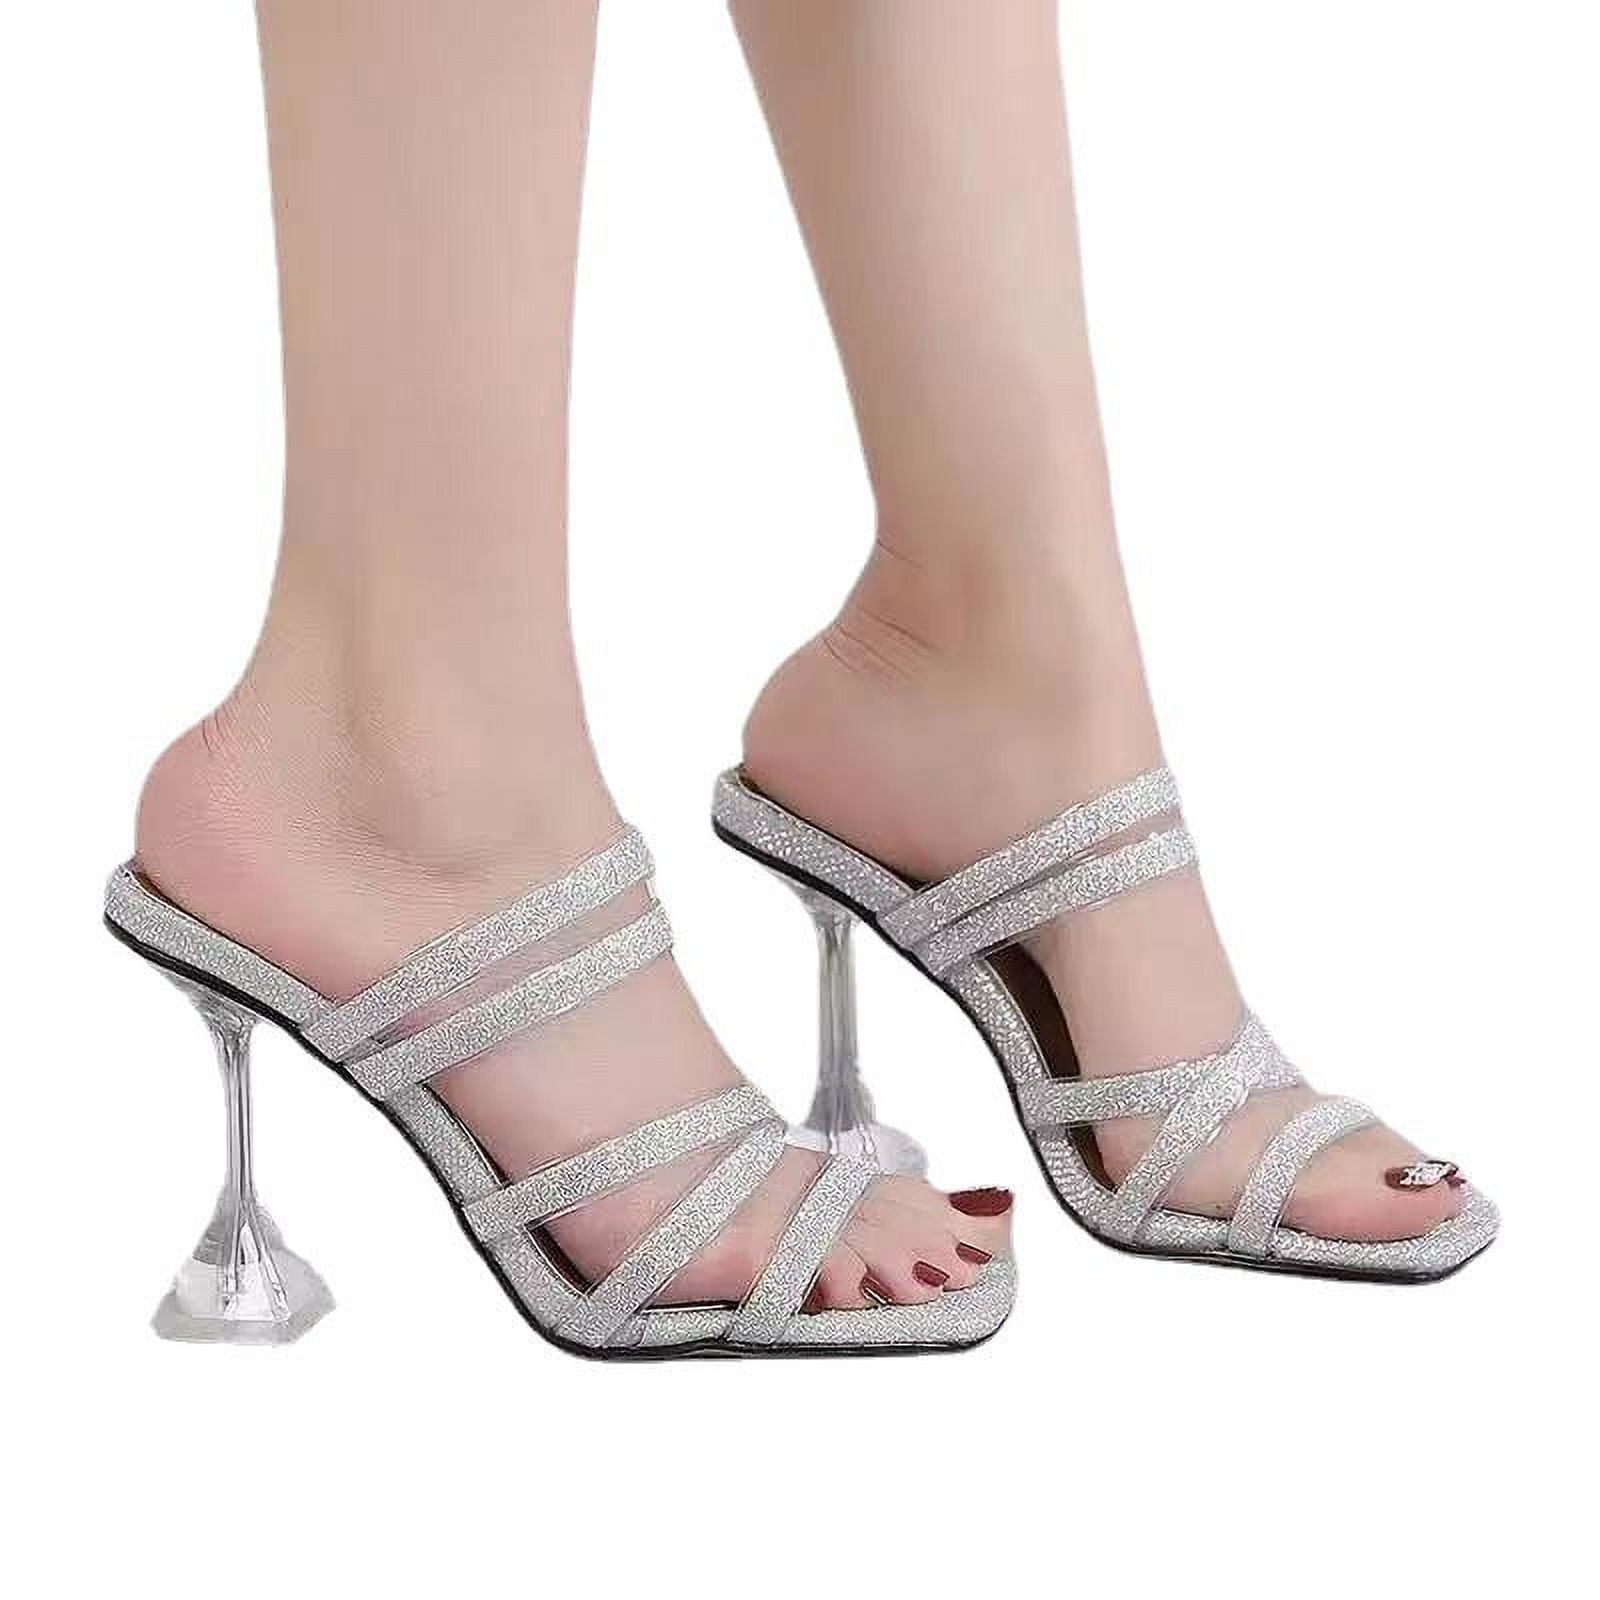 white ladies shoes designer fabric with high heels USA Fabric by Timeless  Treasures - modeS4u